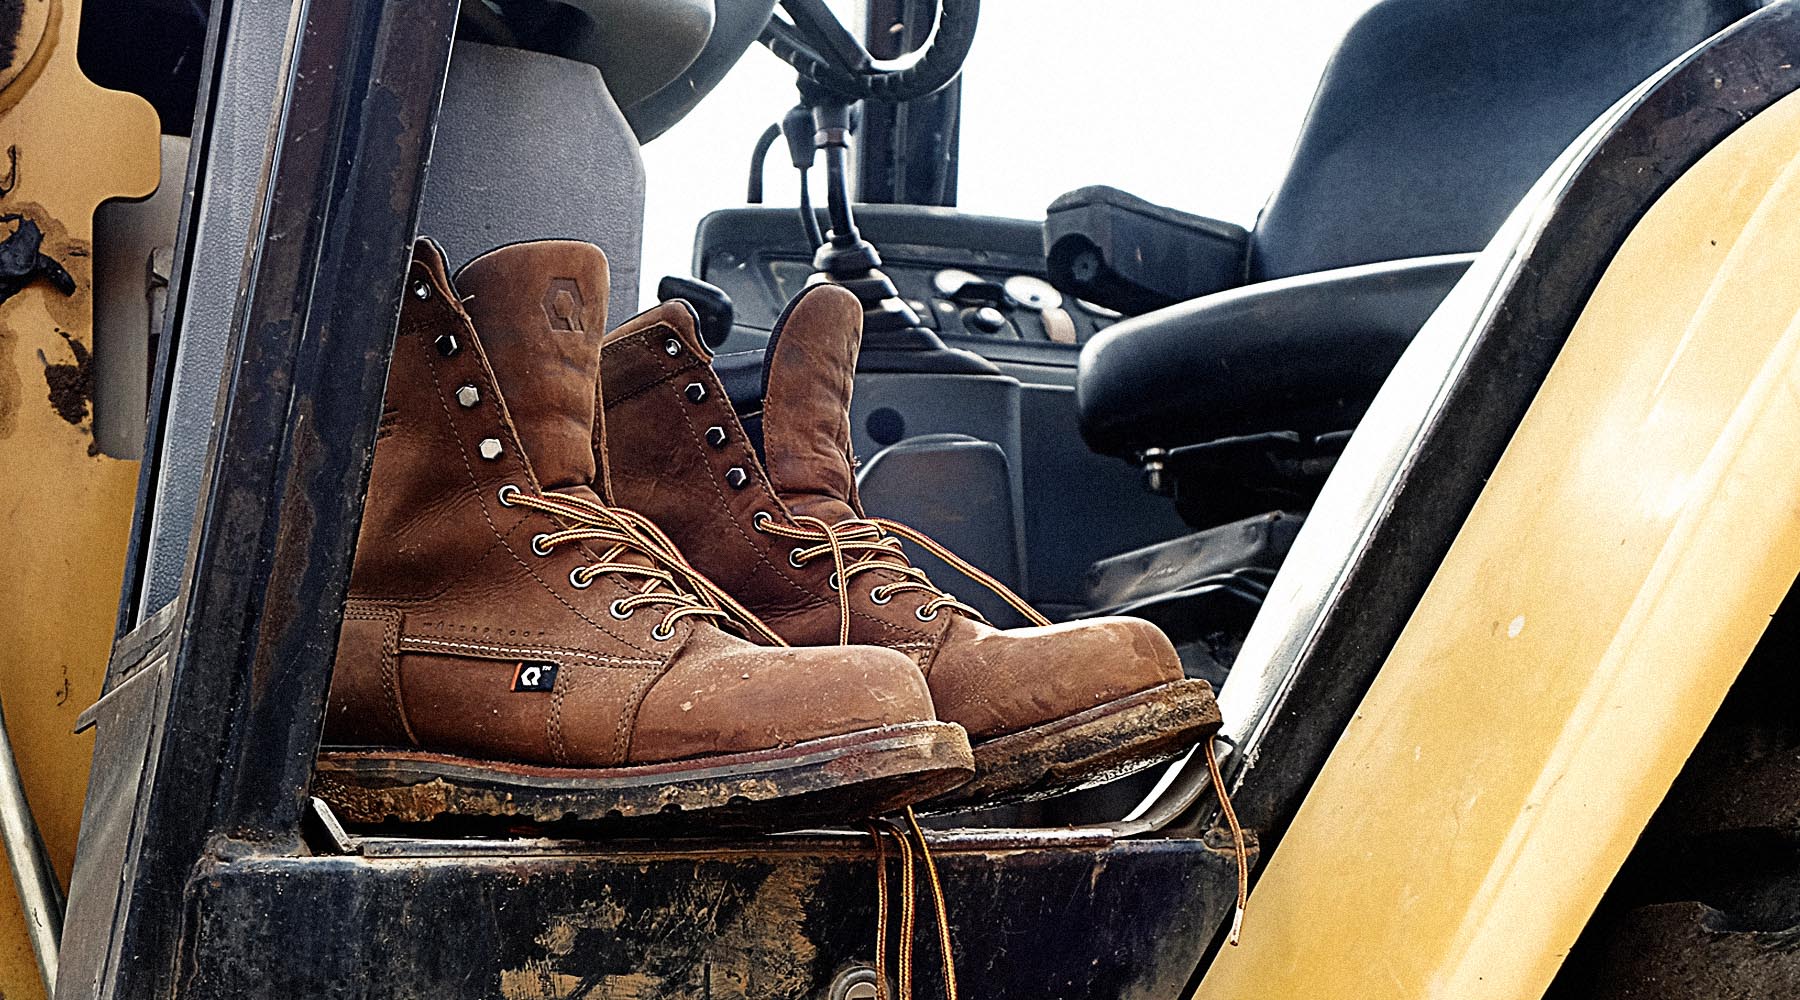 8" BLDR work boot Ready to Work regardless of the weather being a waterproof boot.